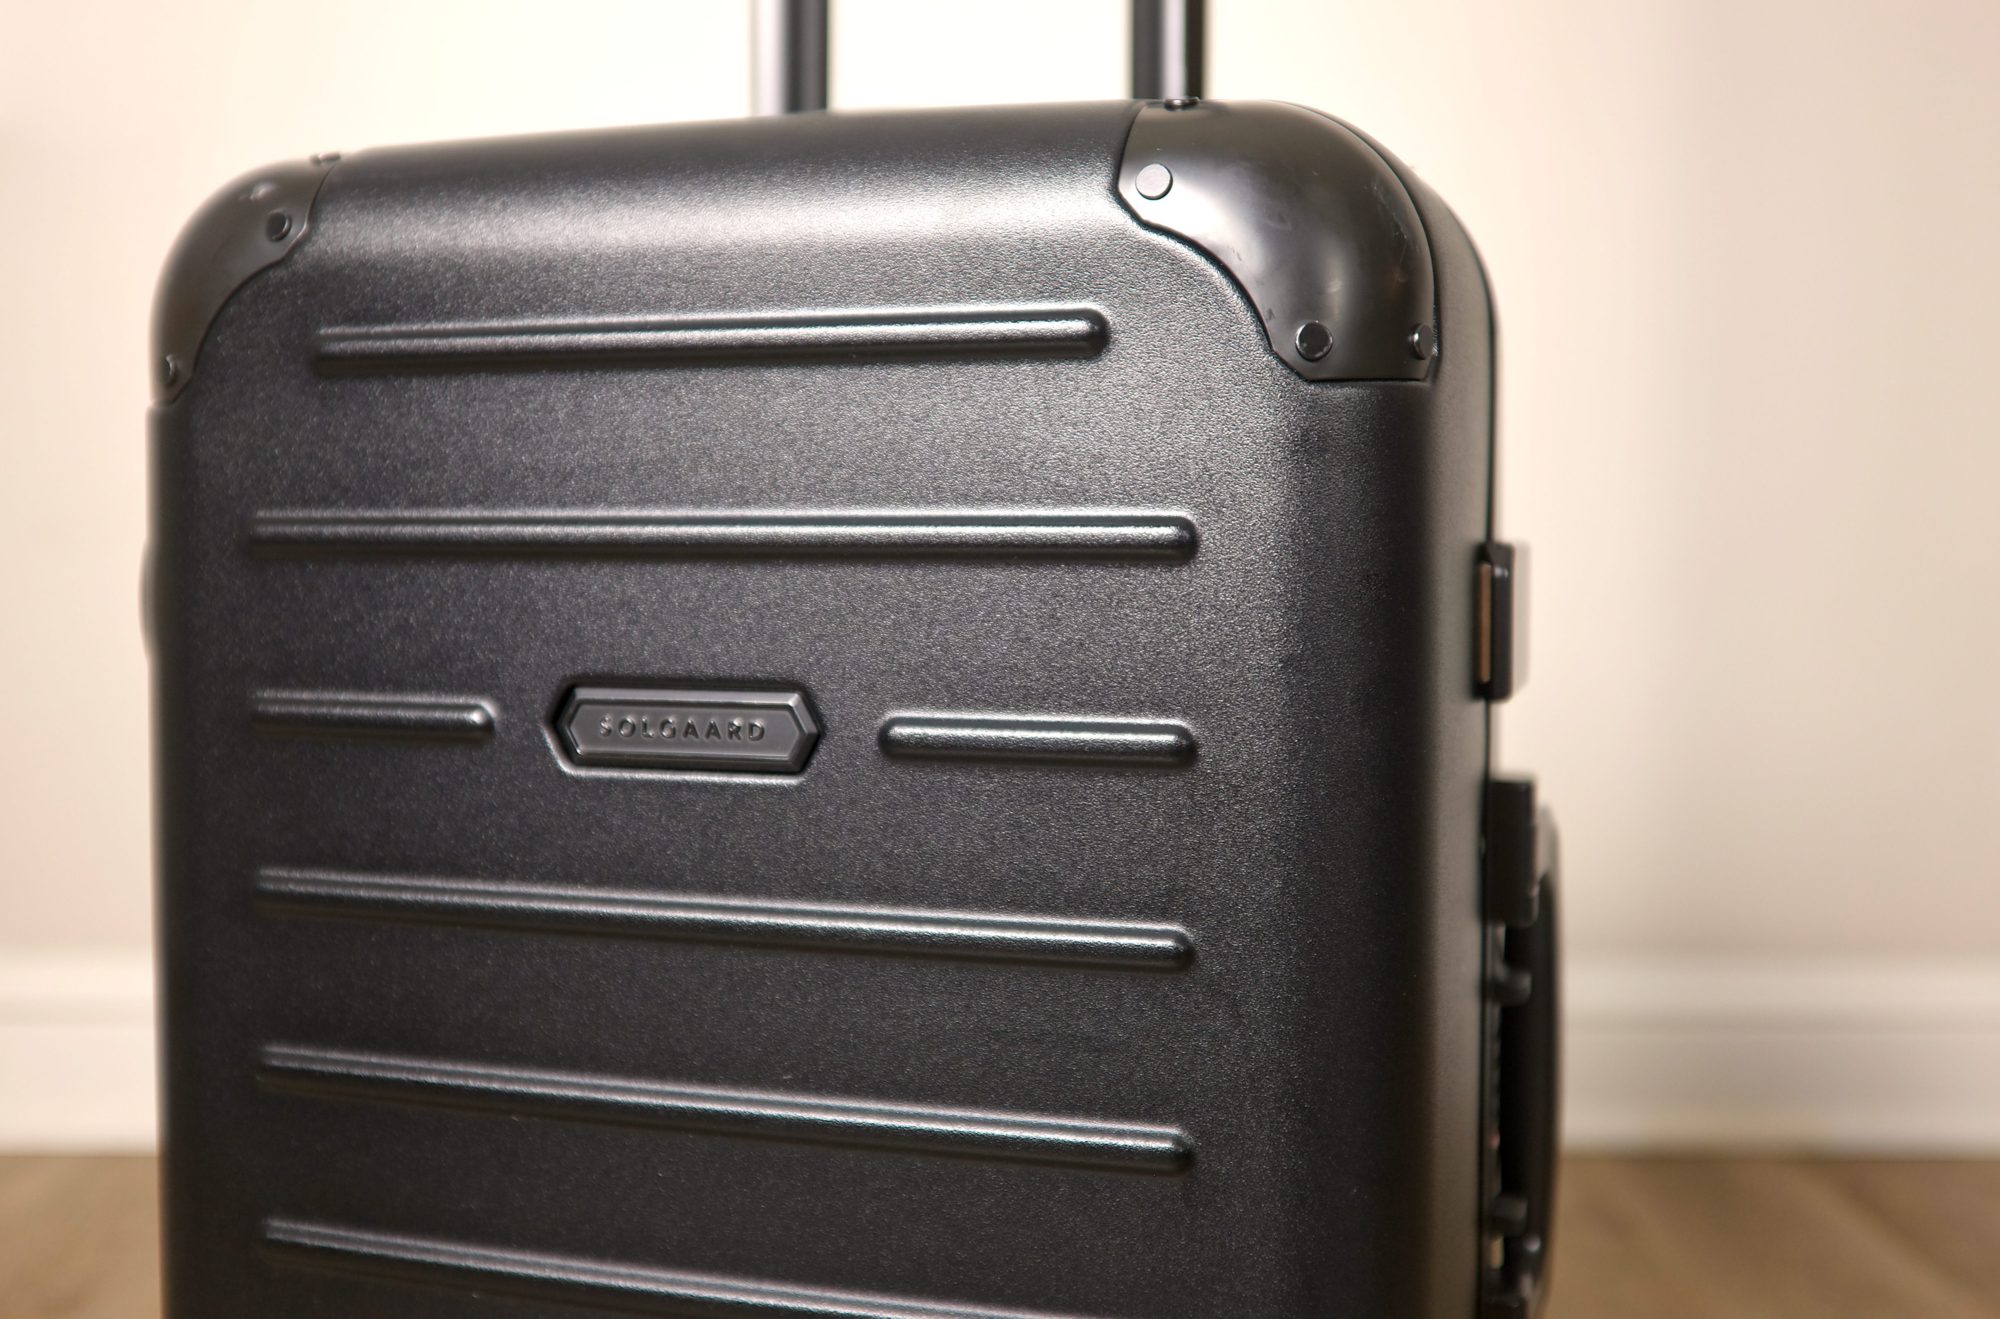 A suitcase with a Solgaard logo